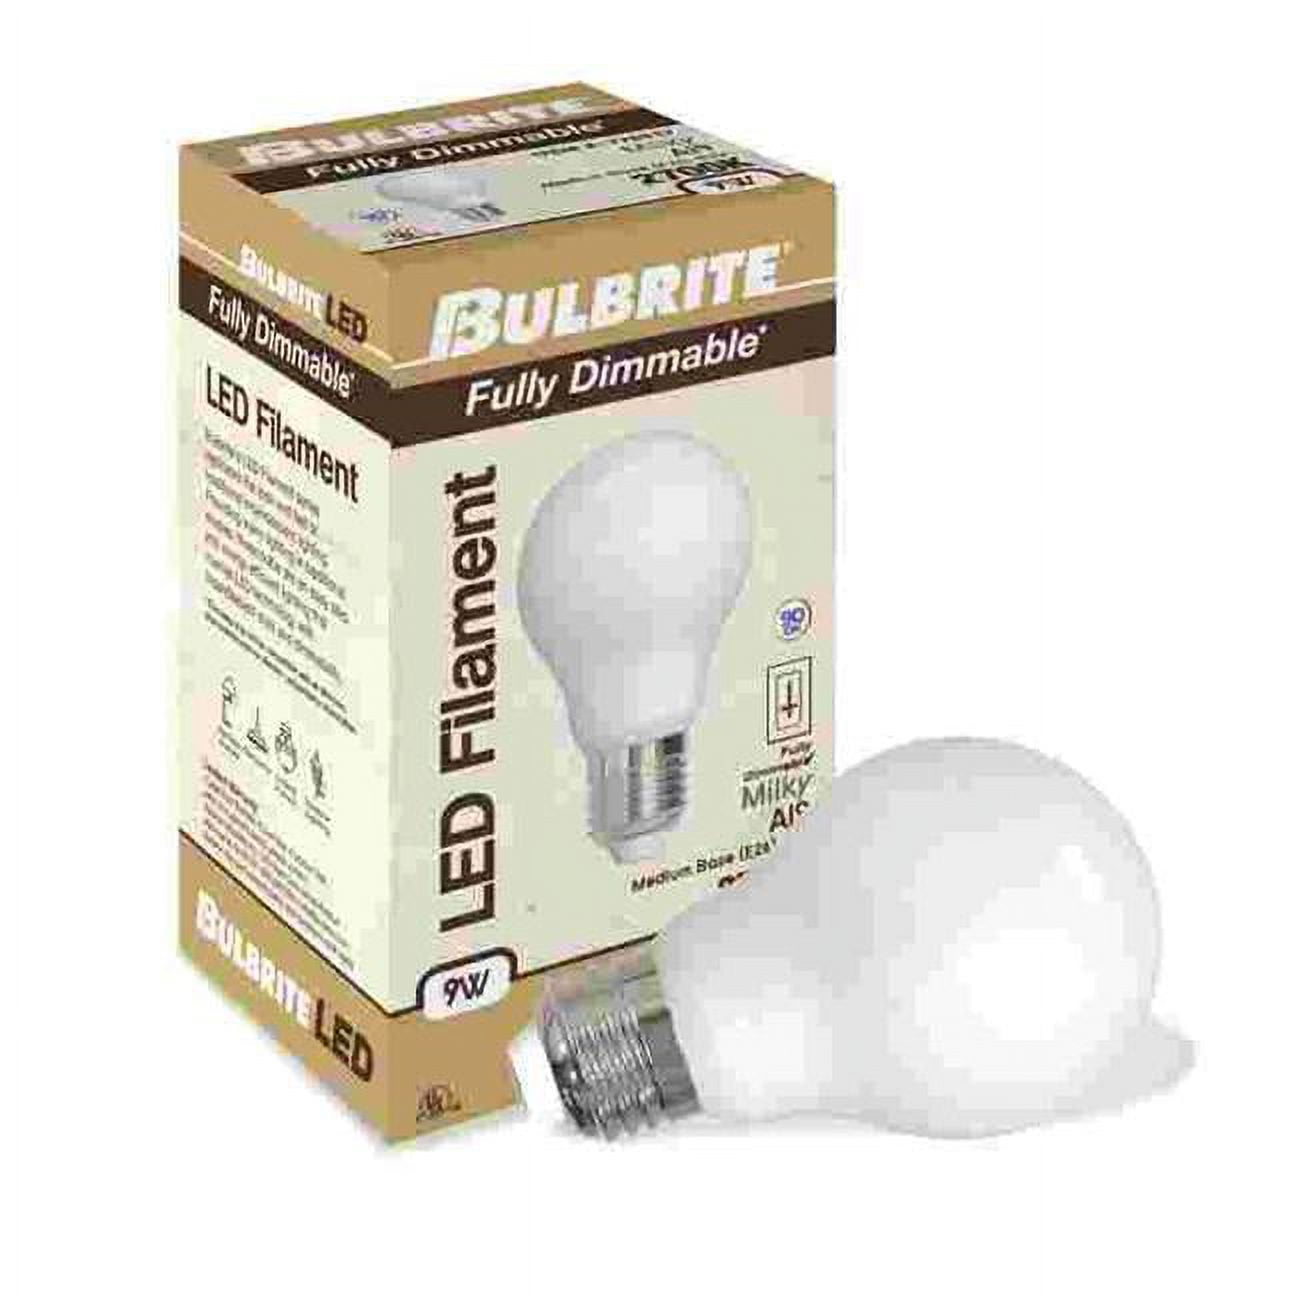 Picture of Bulbrite 862829 LED Filament 9 W Dimmable A19 Light Bulb with Glass Finish & Medium E26 Base - 2700K Warm White Light&#44; 1100 Lumens&#44; Milky - Pack of 4